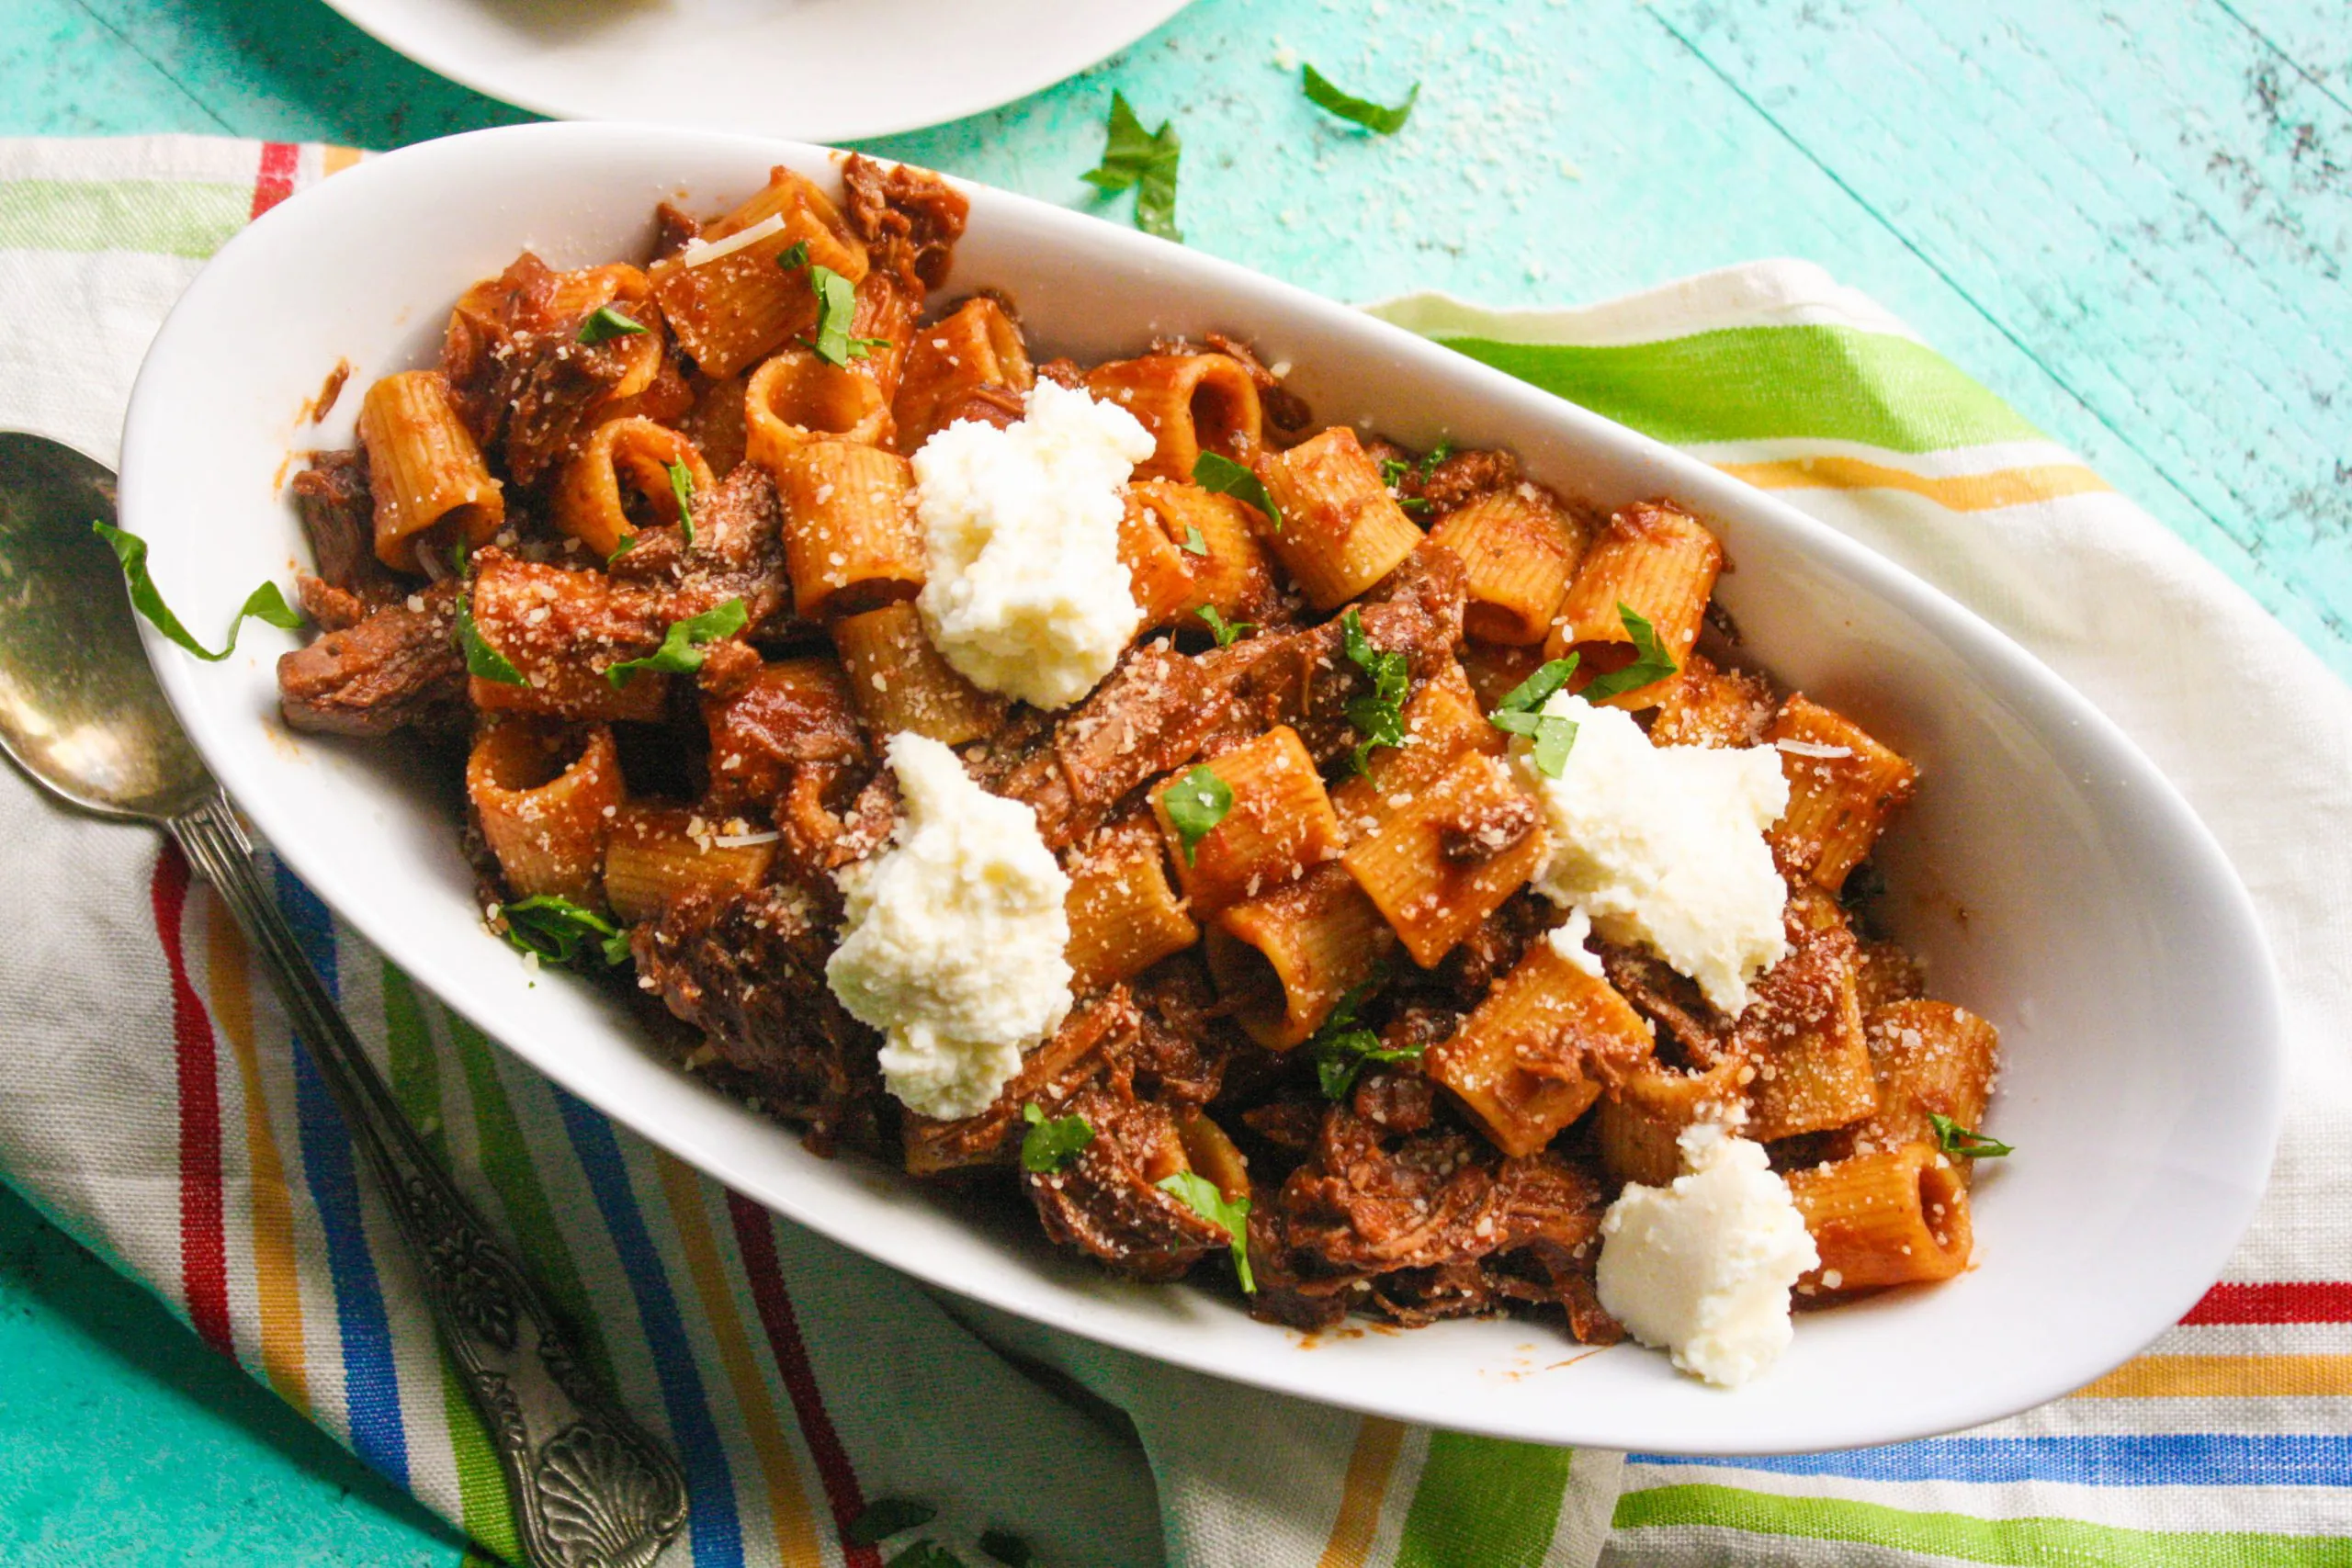 Pasta with short ribs and ricotta is a lovely dish with creamy ricotta as a bonus!